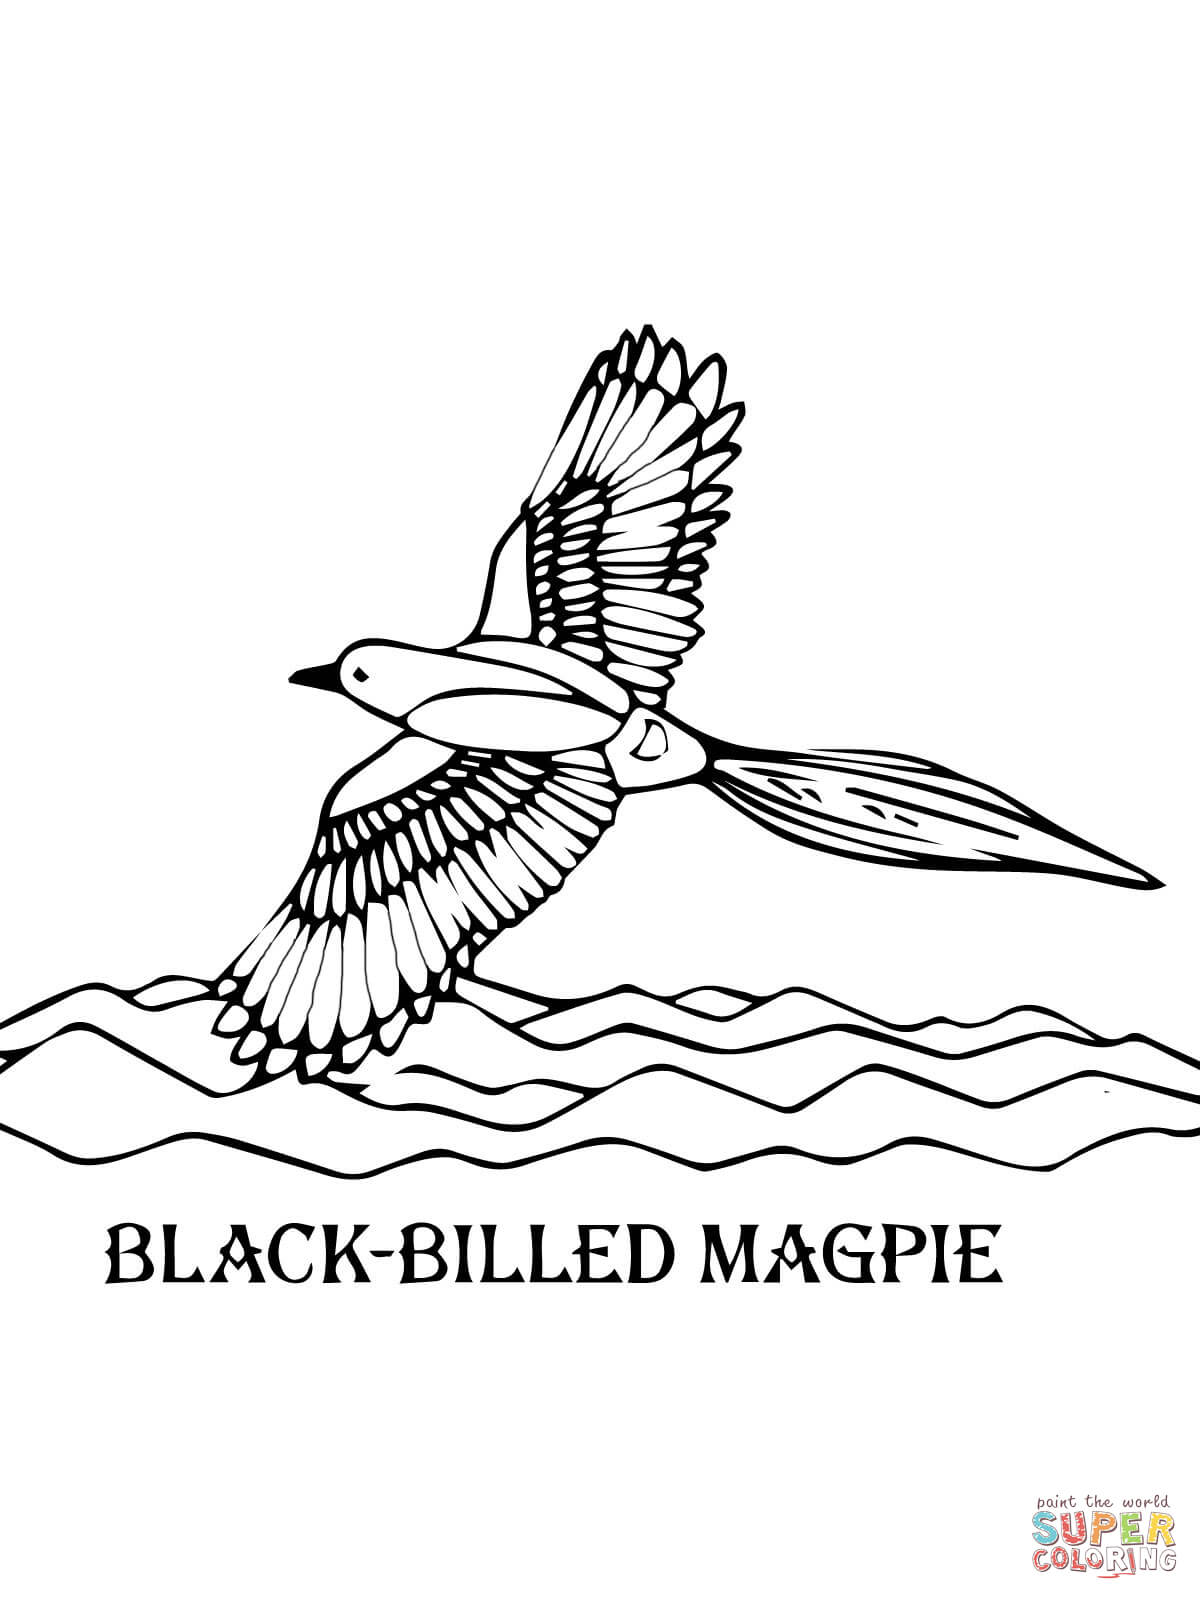 Black-Billed Magpie coloring page | Free Printable Coloring Pages